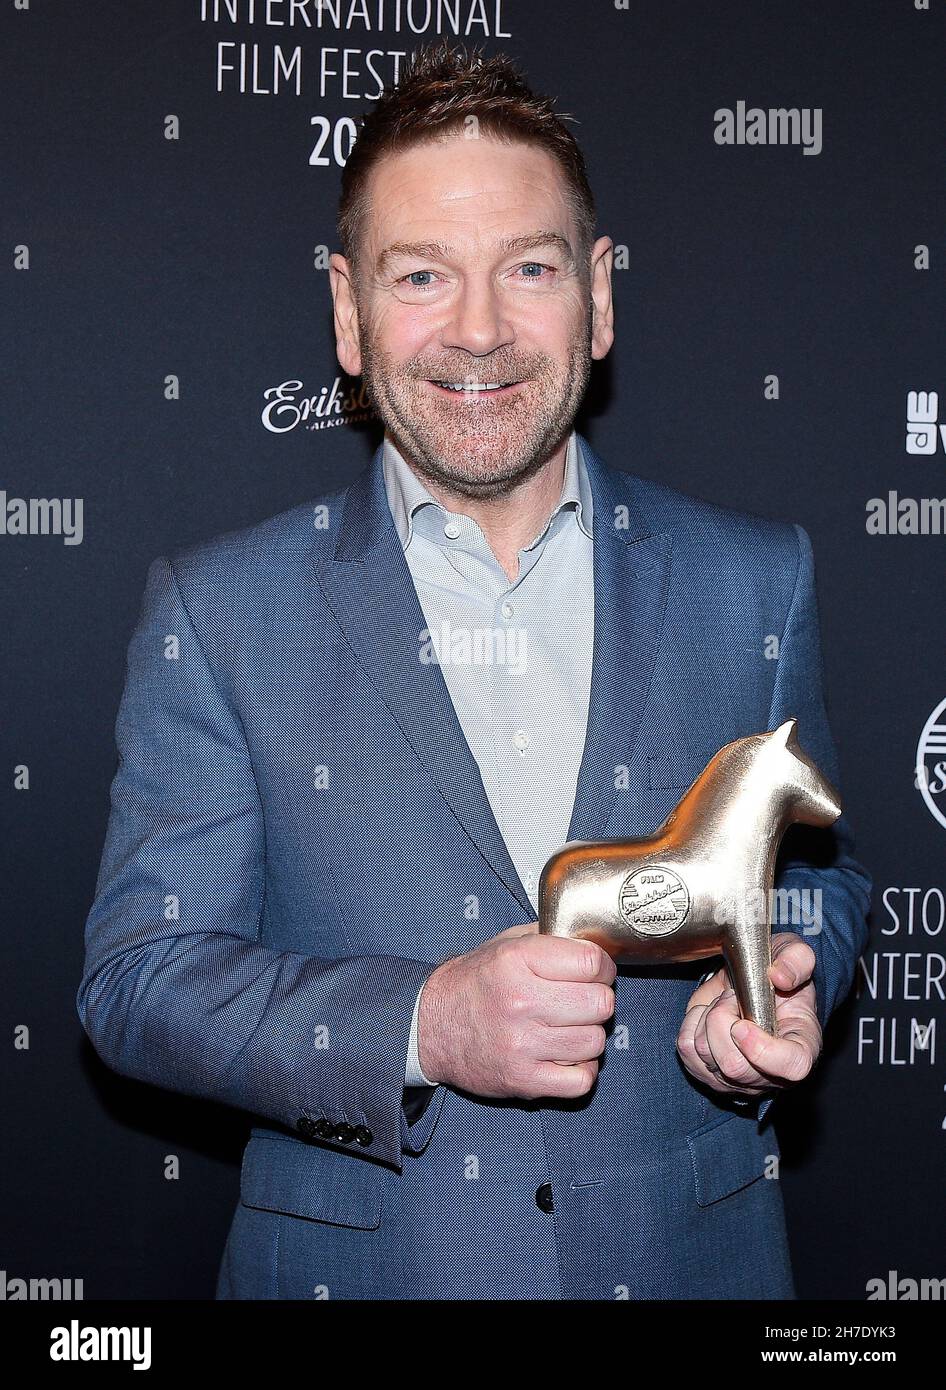 STOCKHOLM 20211120The British actor and director Kenneth Branagh received the honorary Stockholm Achievement award at the Stockholm Film Festival, which ended on Saturday with a screening of Branagh's film 'Belfast'. Photo: Karin Törnblom / TT / code 2377 *** PAYMENT PICTURE *** Stock Photo